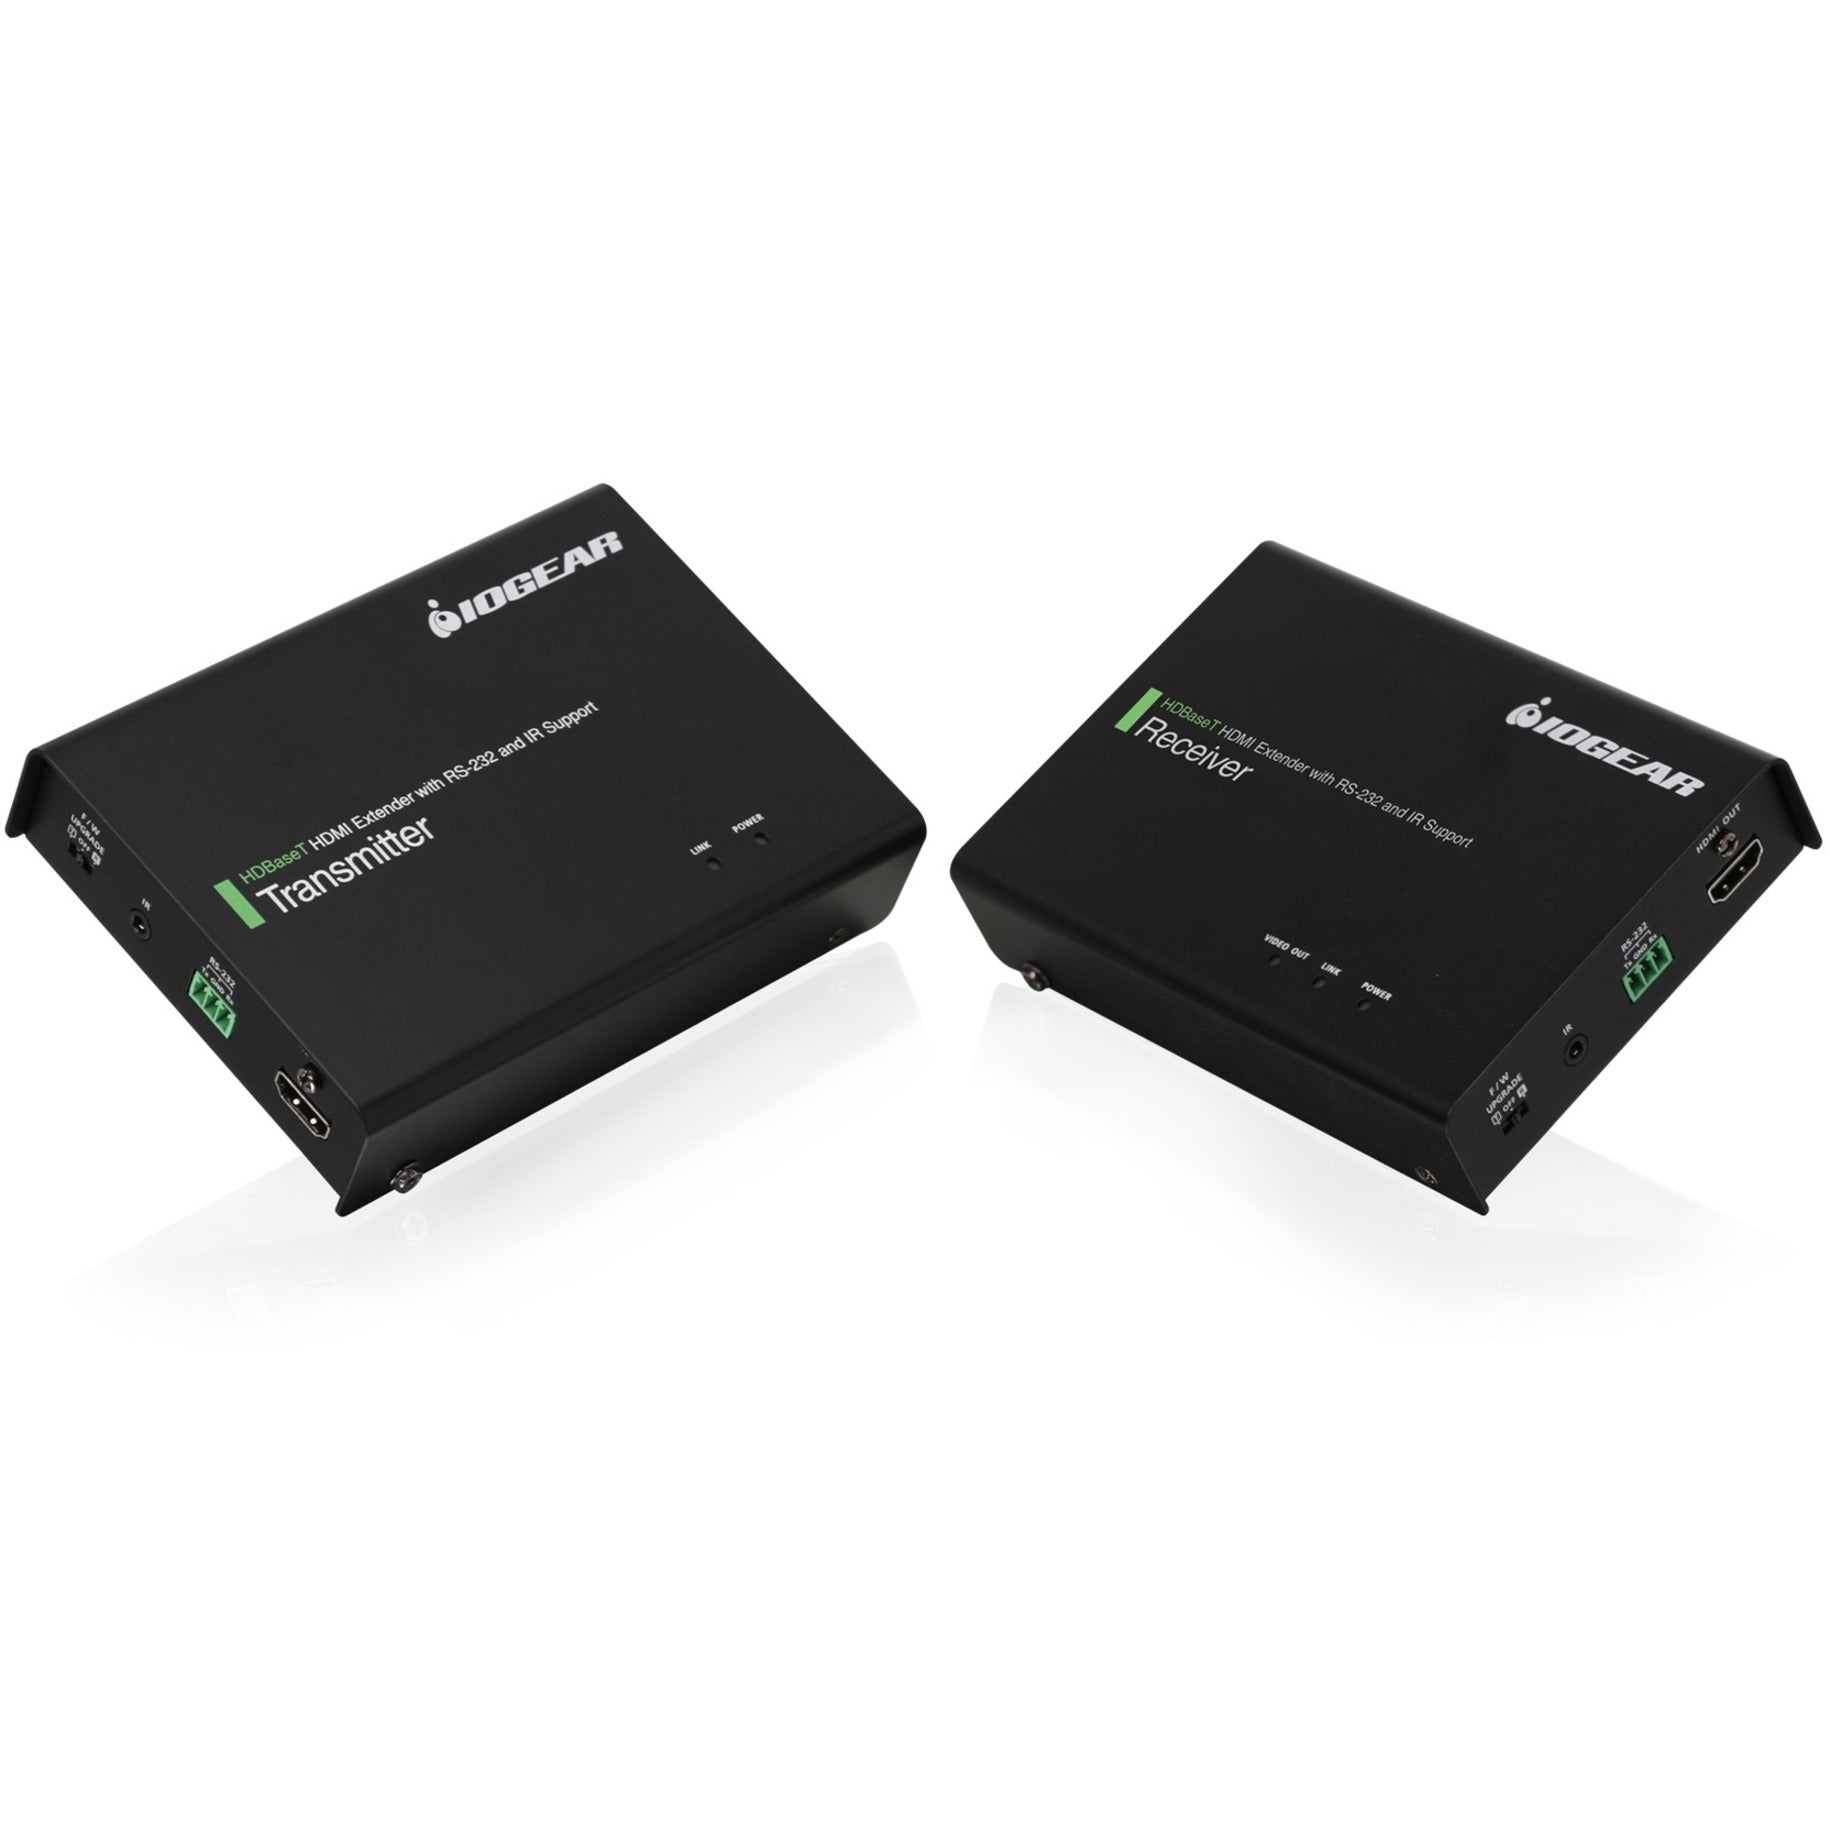 IOGEAR GVE340 Cinema 4K HDBaseT-Lite Extender with HDMI Connection and POH, 4K Video Extender Transmitter/Receiver